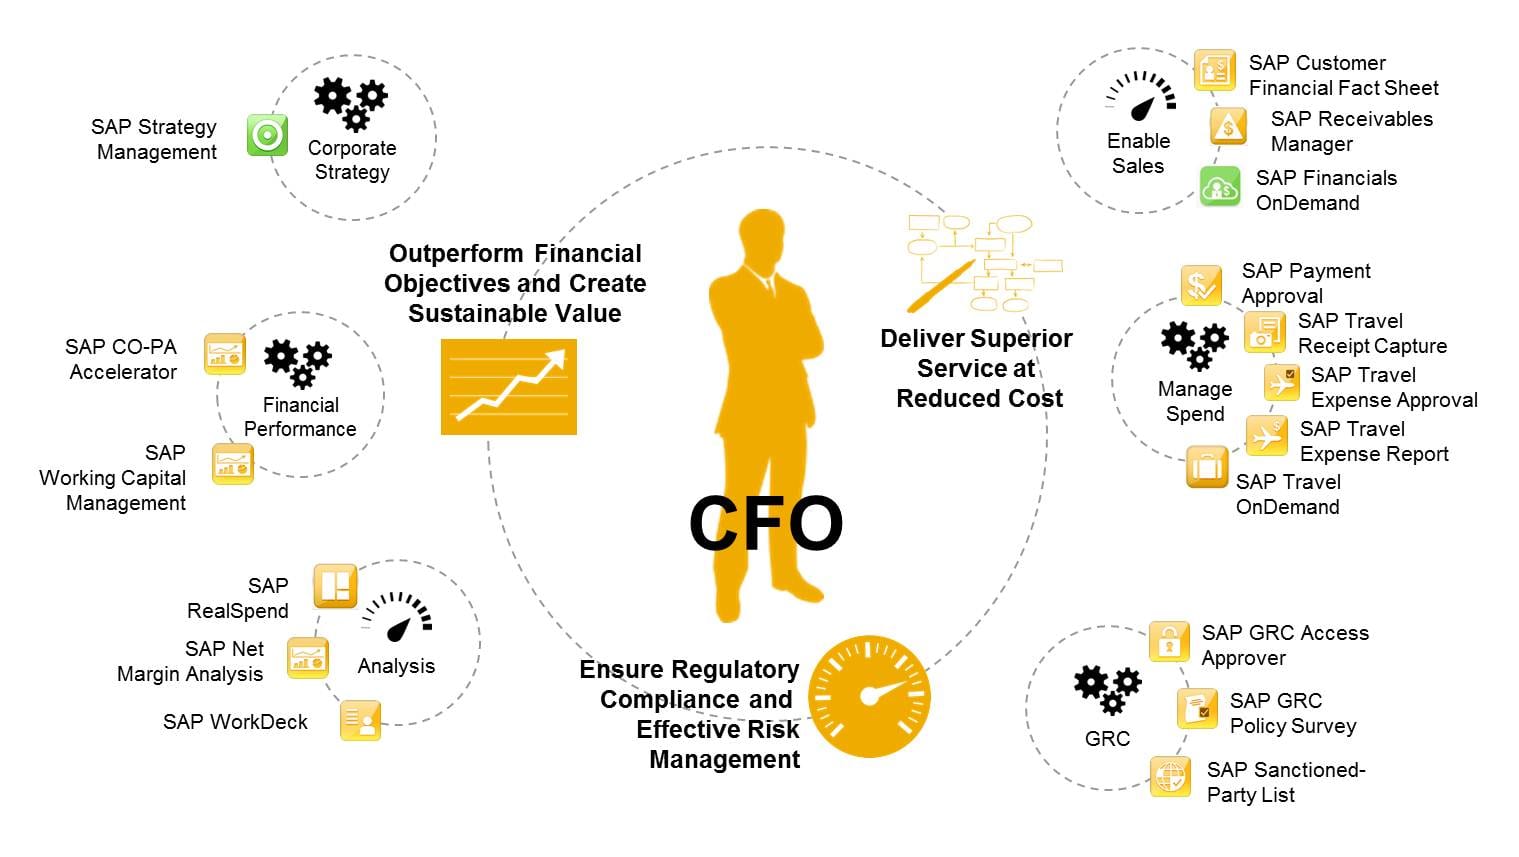 Want to Be a CFO? You’ll Need More Than an Accounting Degree